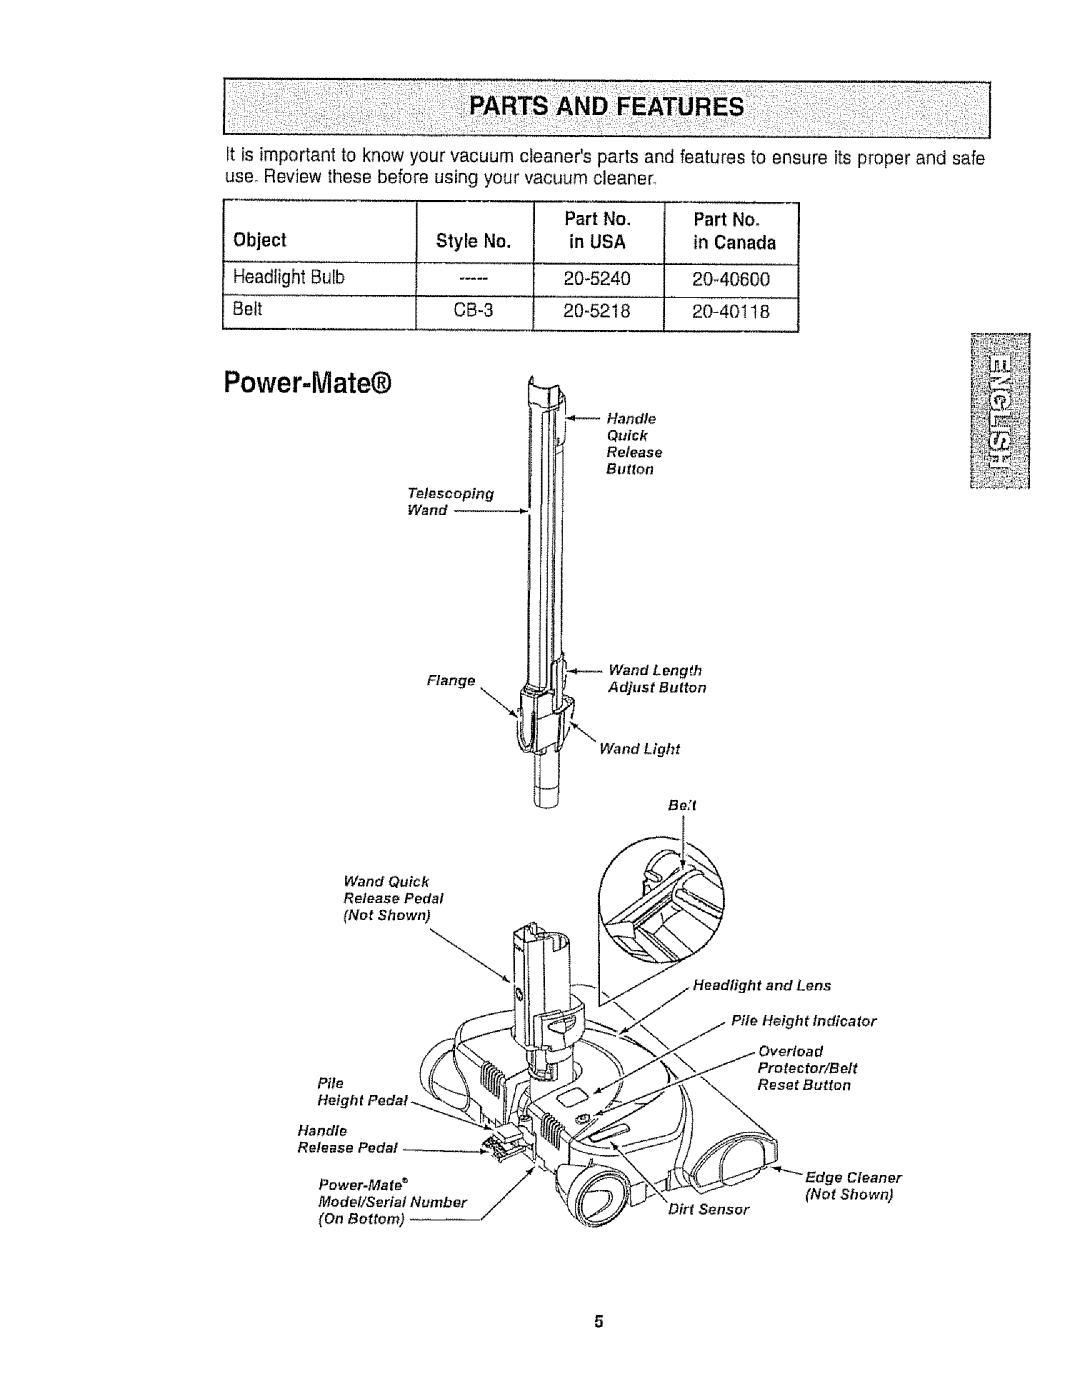 Kenmore 116.25812 owner manual Power-Mate@, Part No, in USA 